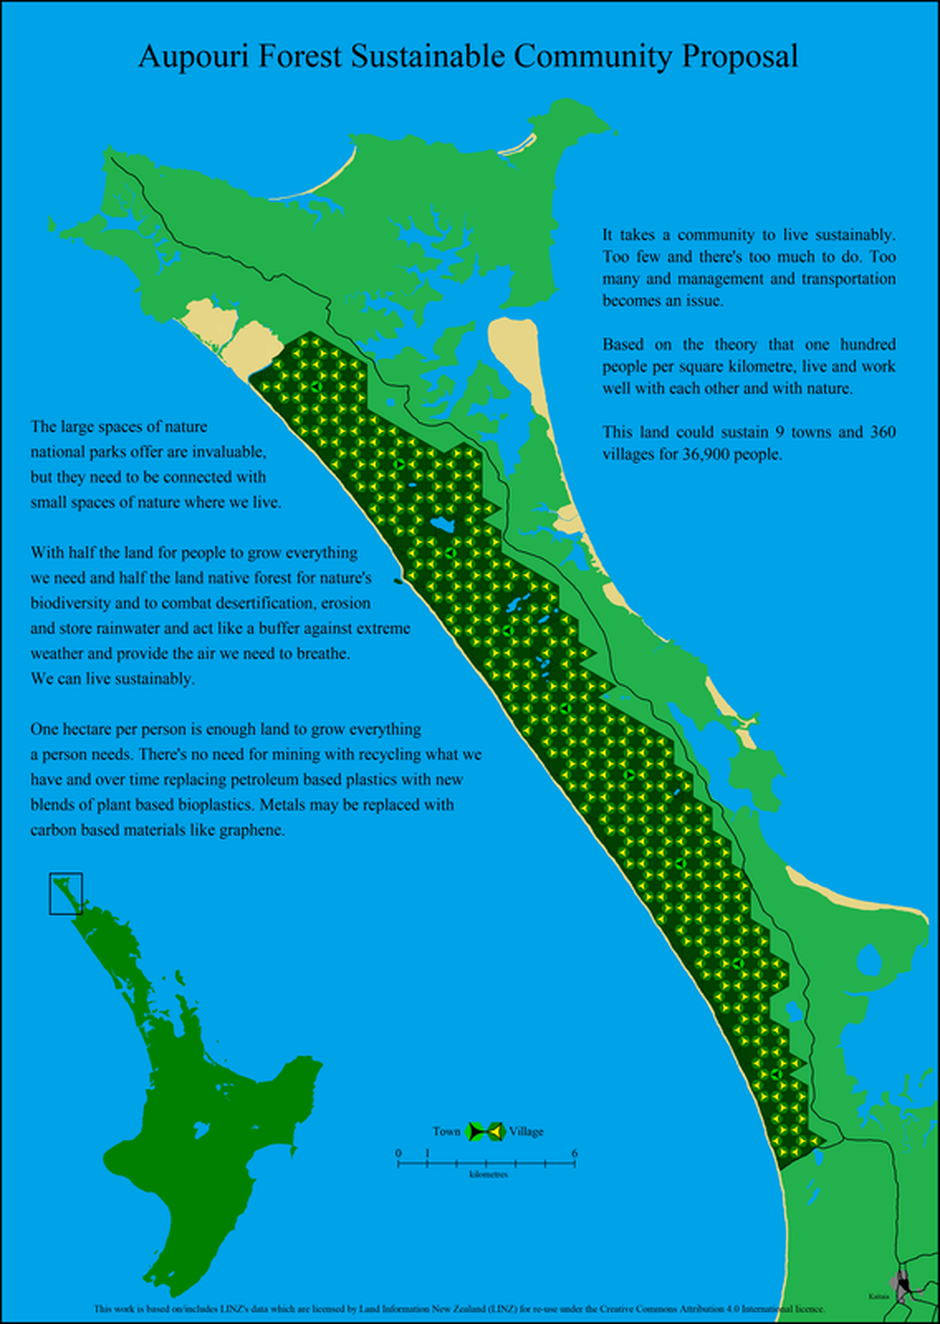 Map of The Aupouri Forest Sustainable Community Proposal and link to pdf map. It shows the Aupouri Forest at the top of the North Island of Aotearoa New Zealand with a sustainable community of 9 towns and 360 villages for 36,900 people. This work by kane J Fielding is based on/includes LINZ's data which are licensed by Land Information New Zealand (LINZ) for re-use under the Creative Commons Attribution 4.0 International licence.